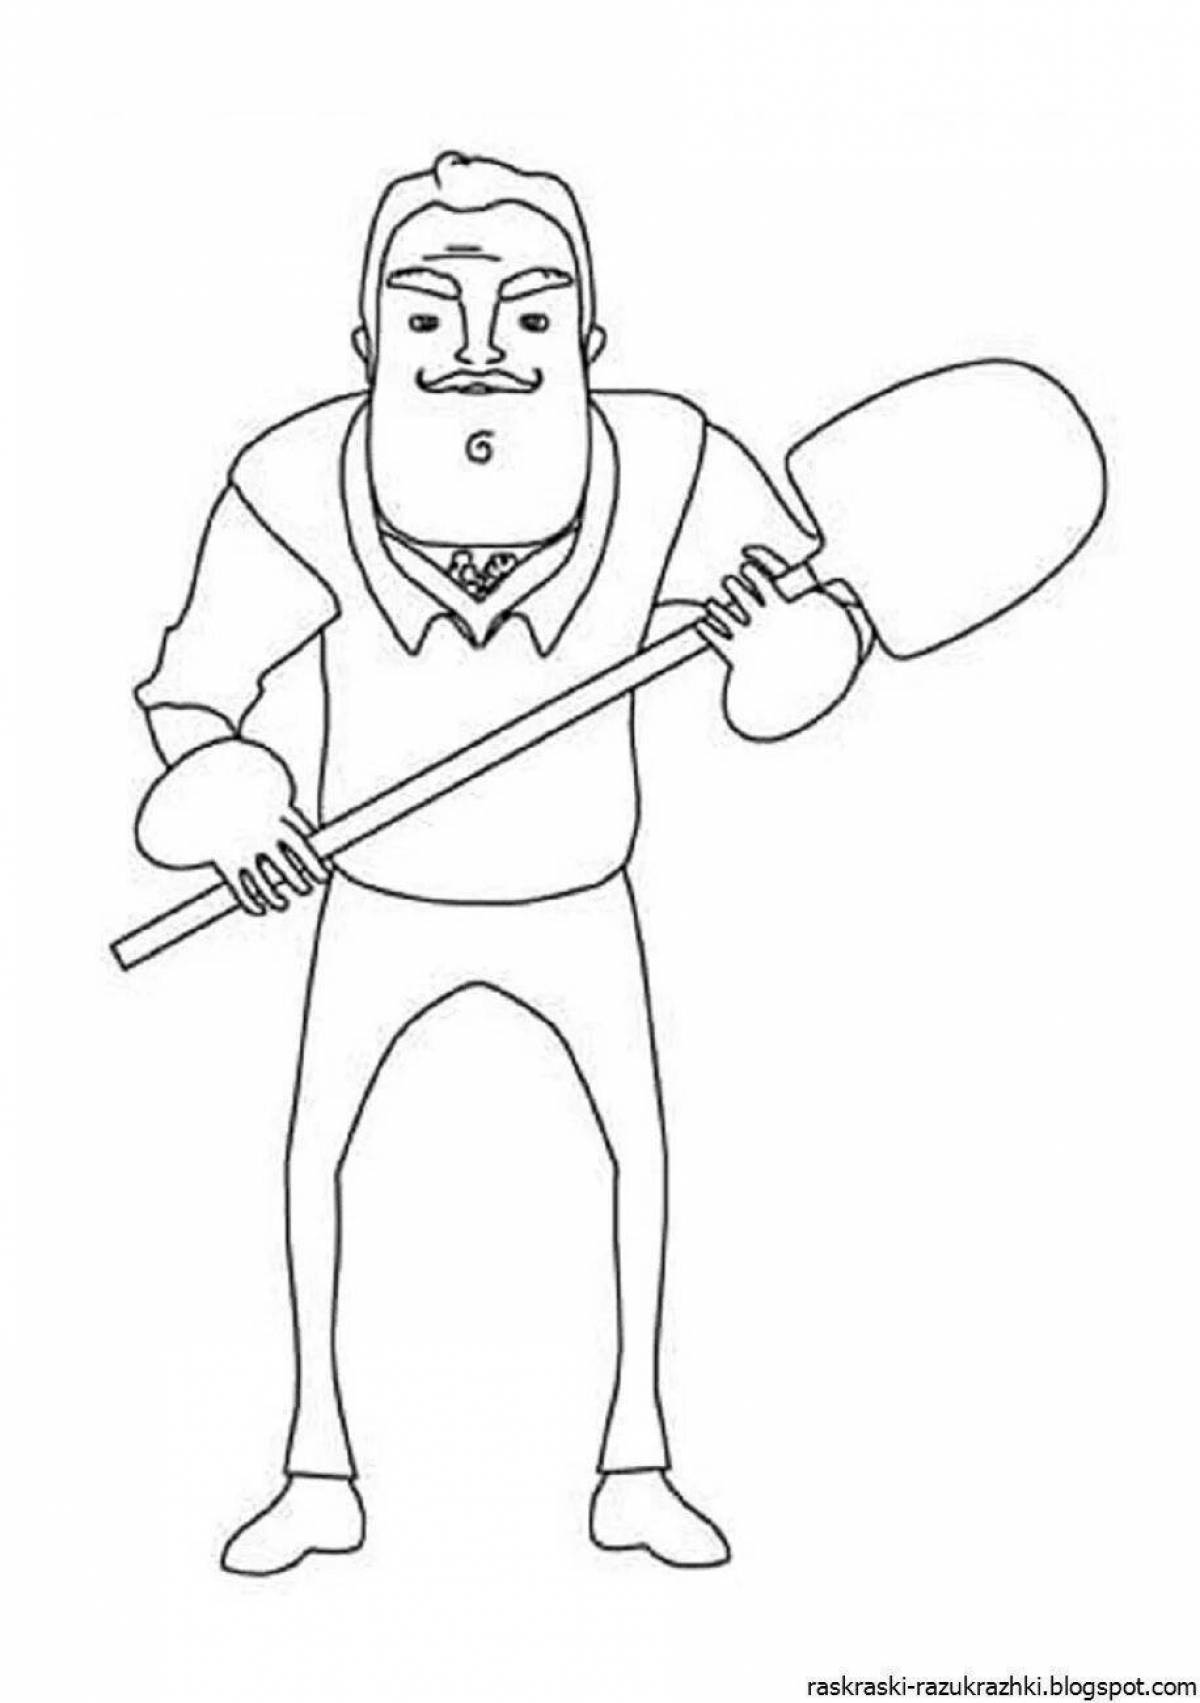 Detailed hello neighbor crow coloring page